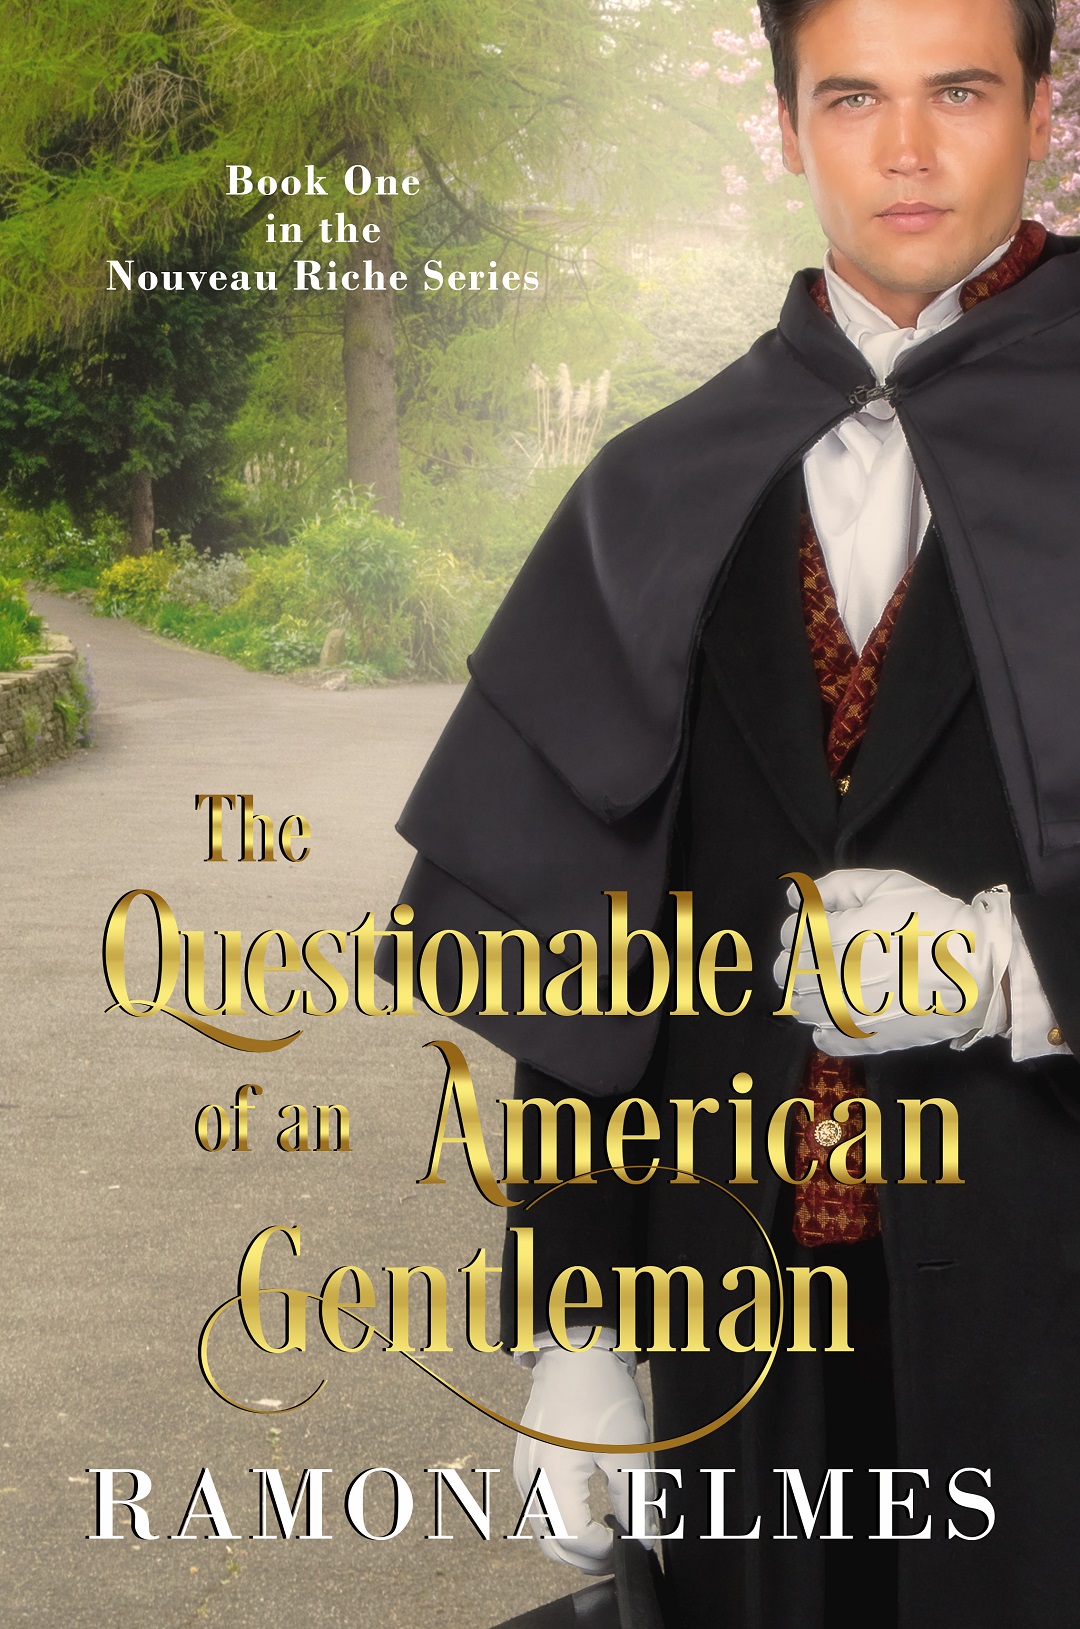 The Questionable Acts of an American Gentleman 300 dpi (1)